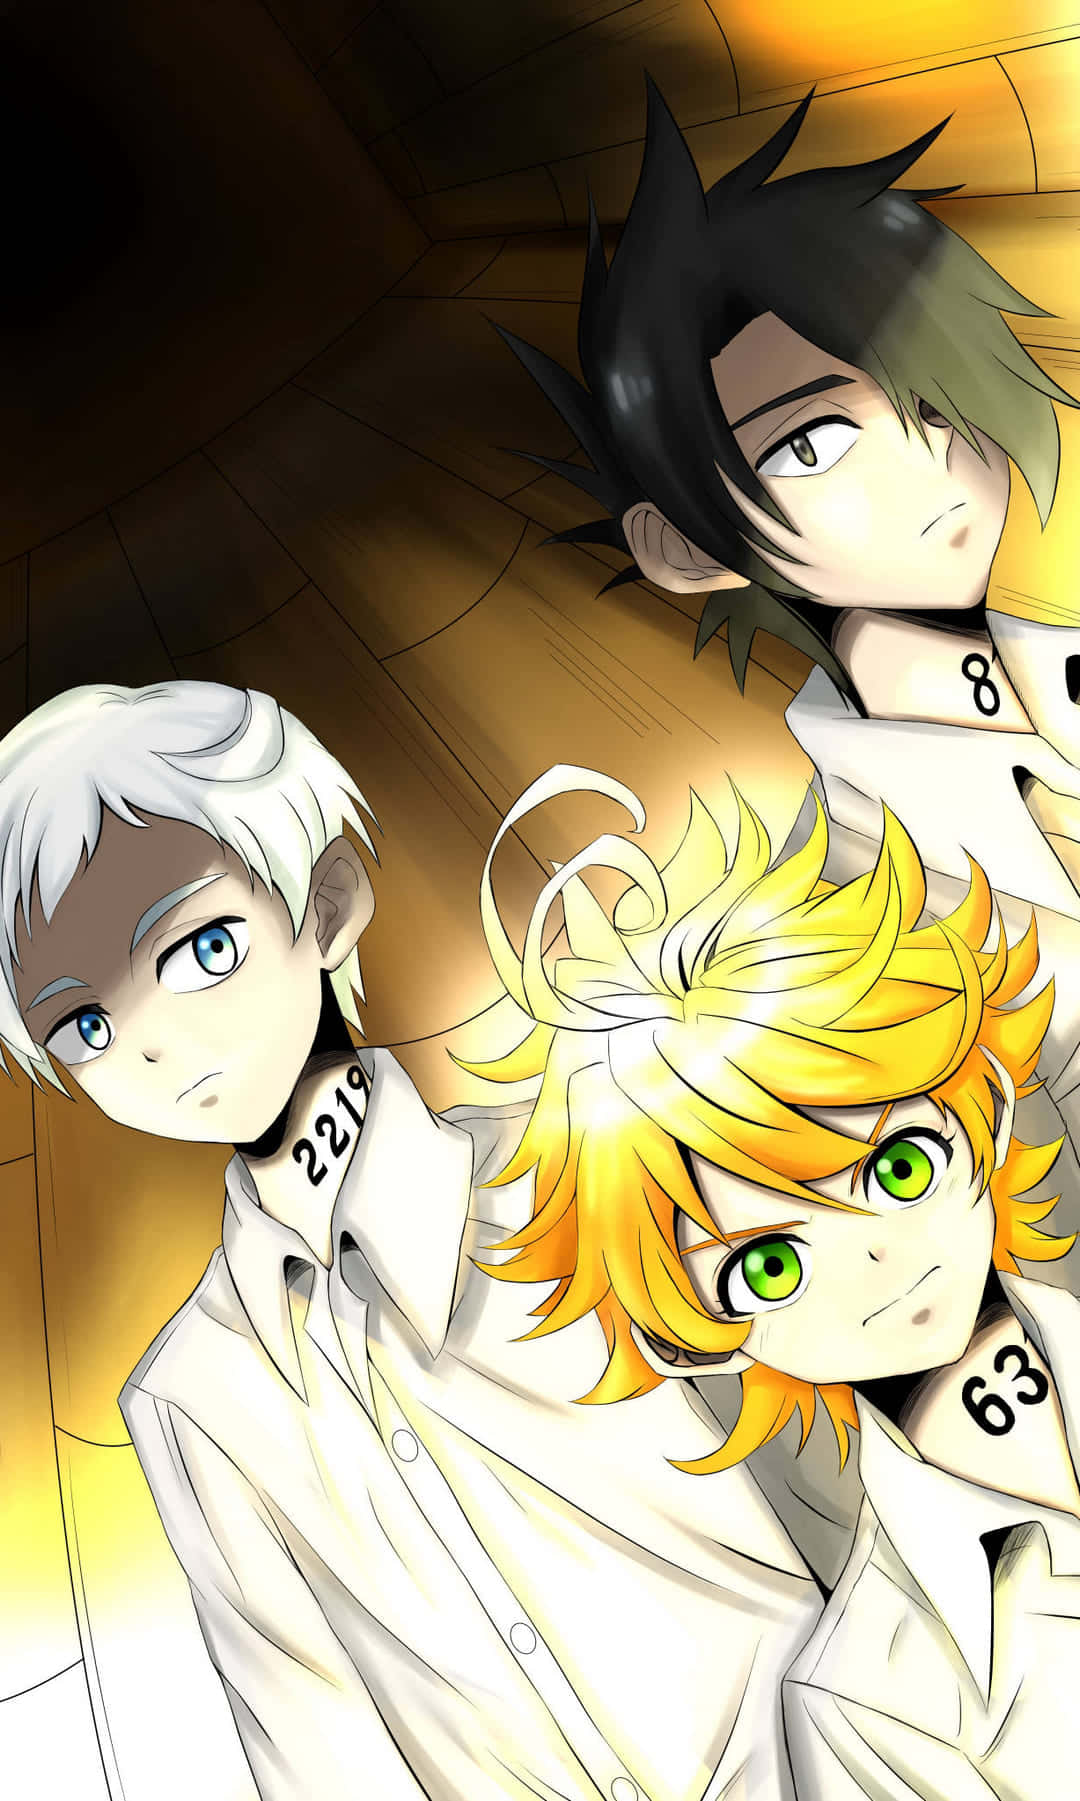 Captivating Artwork From The Promised Neverland